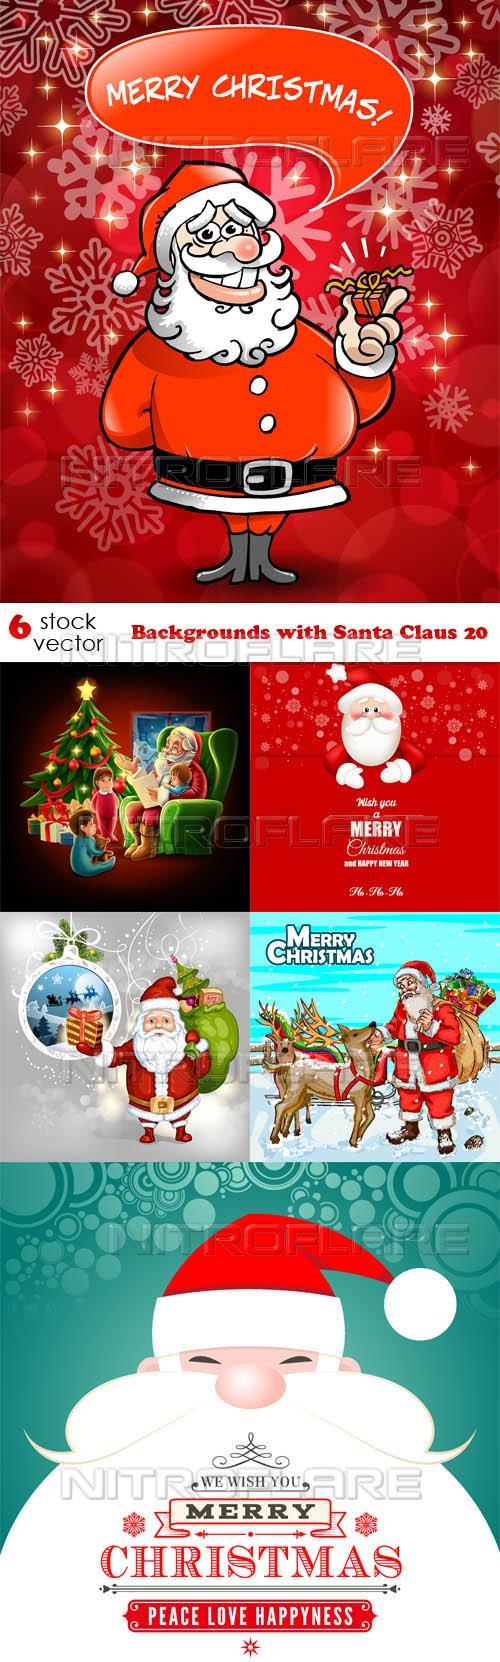 Backgrounds with Santa Claus 20 ((aitff (9 files)